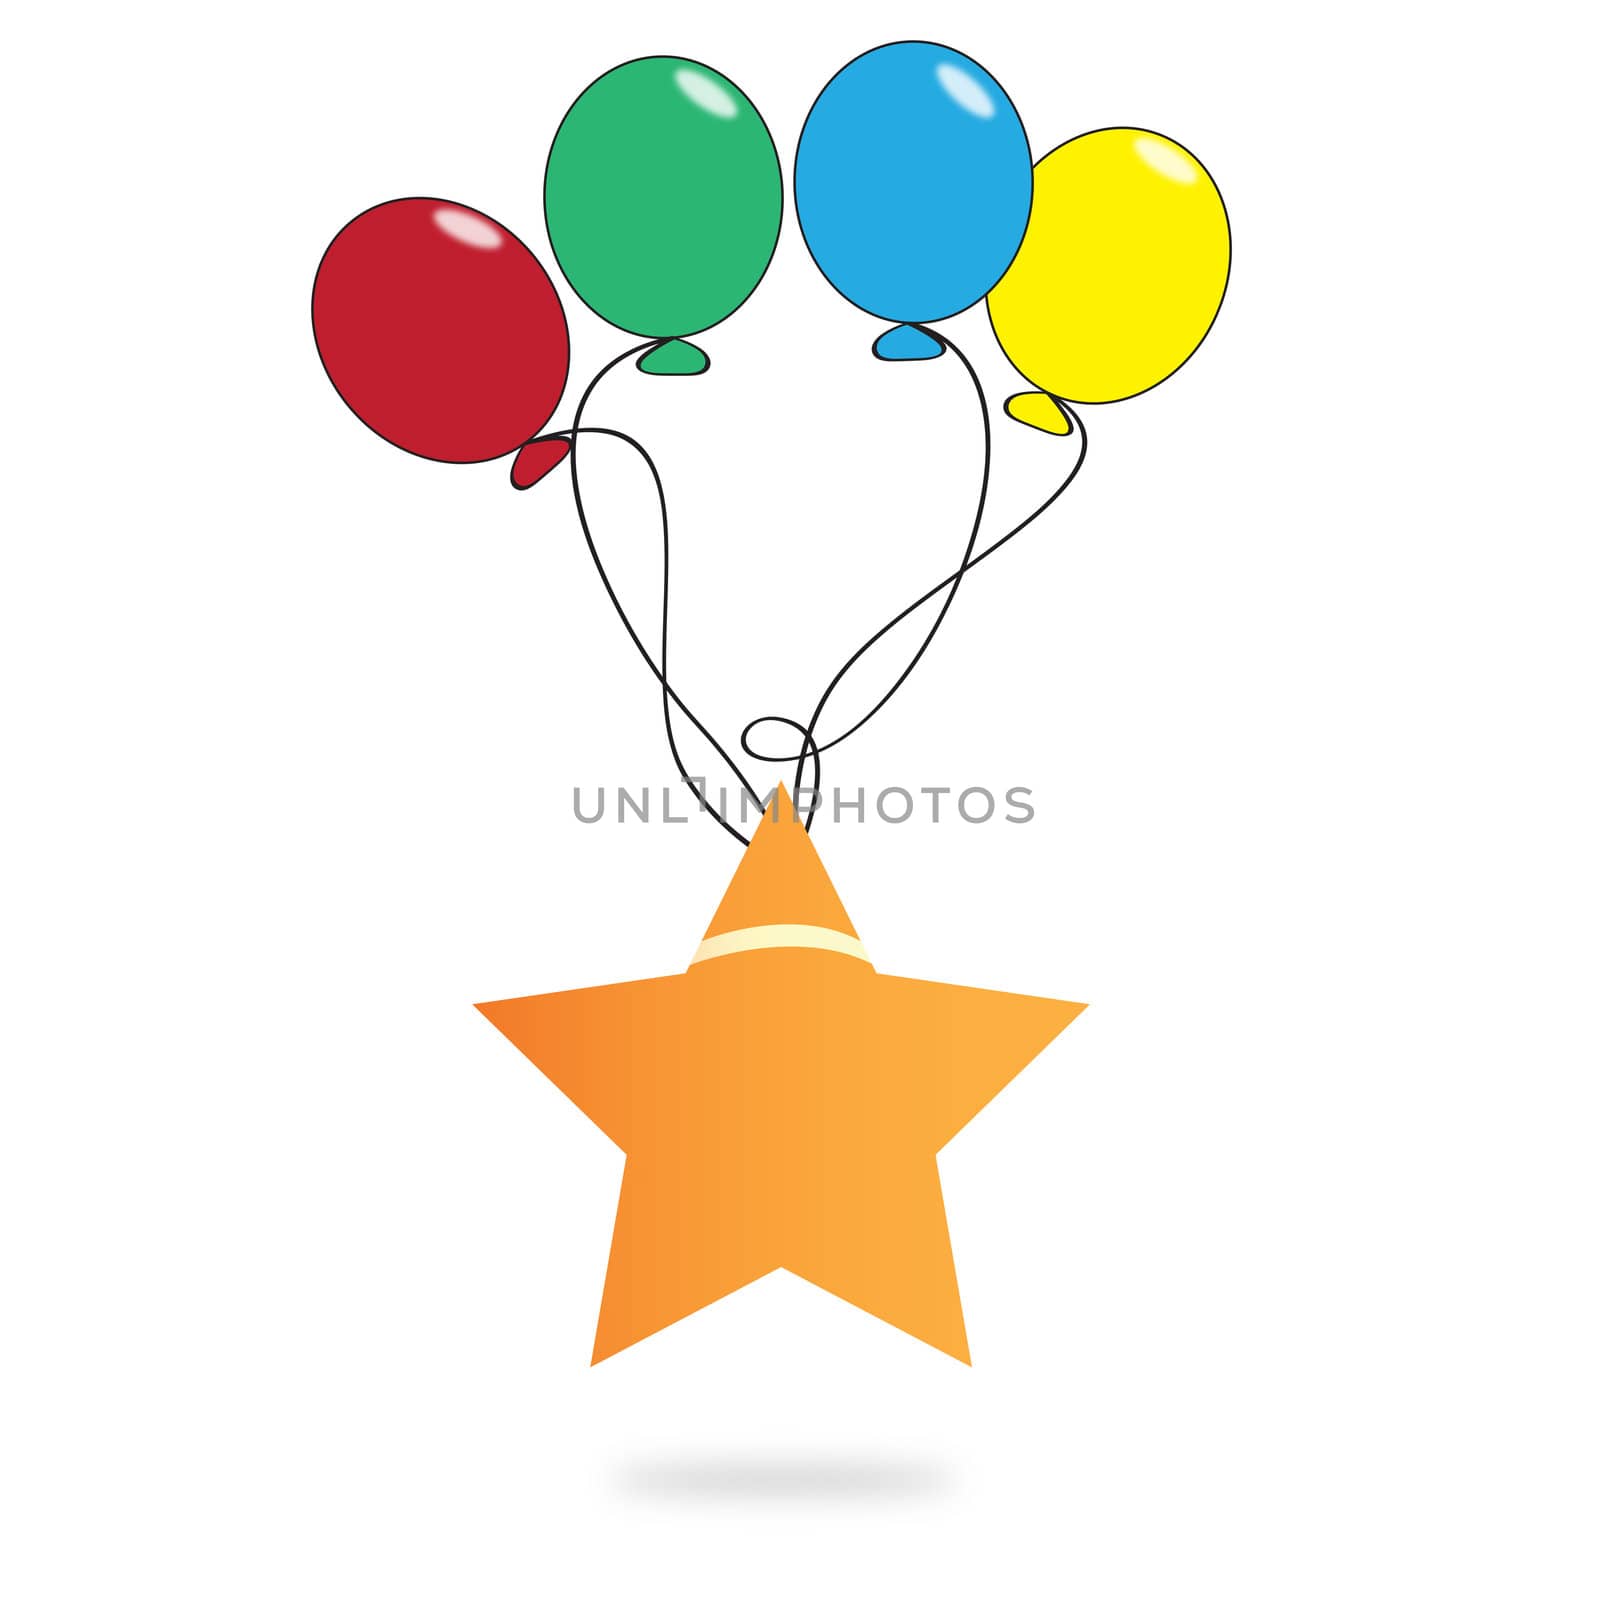 Star with balloon on white background